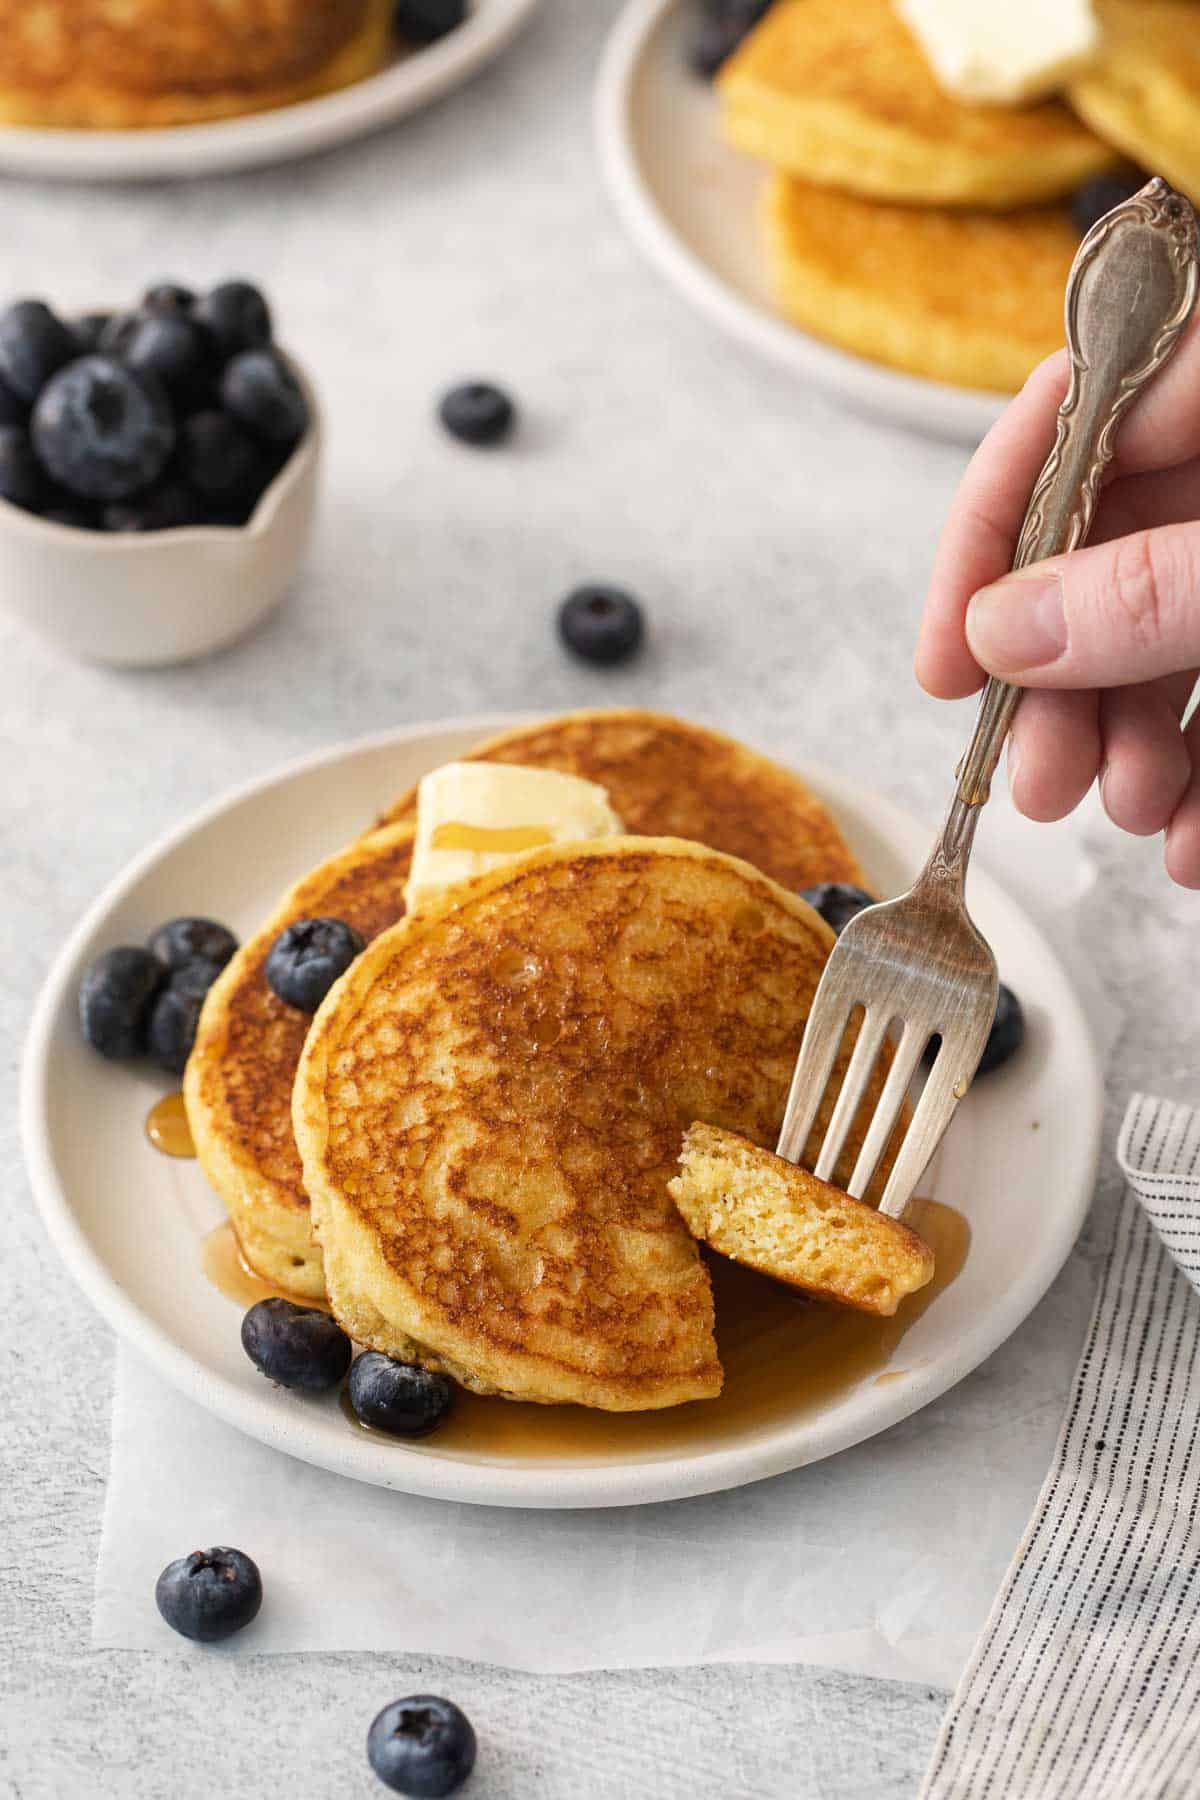 Cornmeal pancakes on a plate with a fork taking a bite out of it